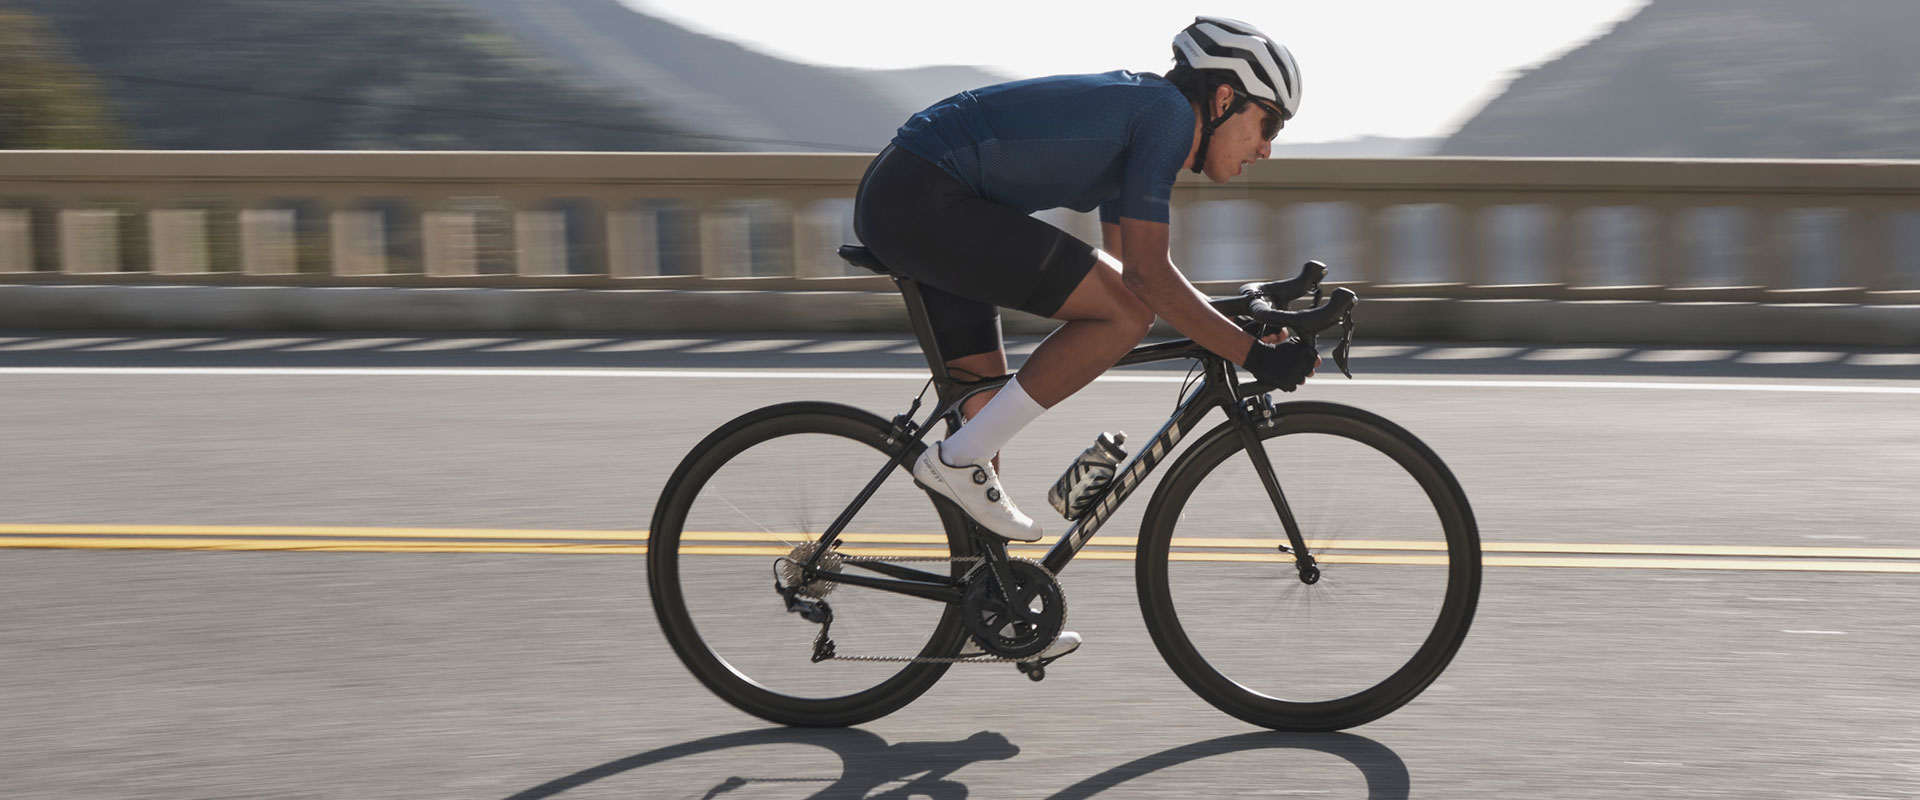 SLR 1 42 WheelSystem | Giant Bicycles Official site